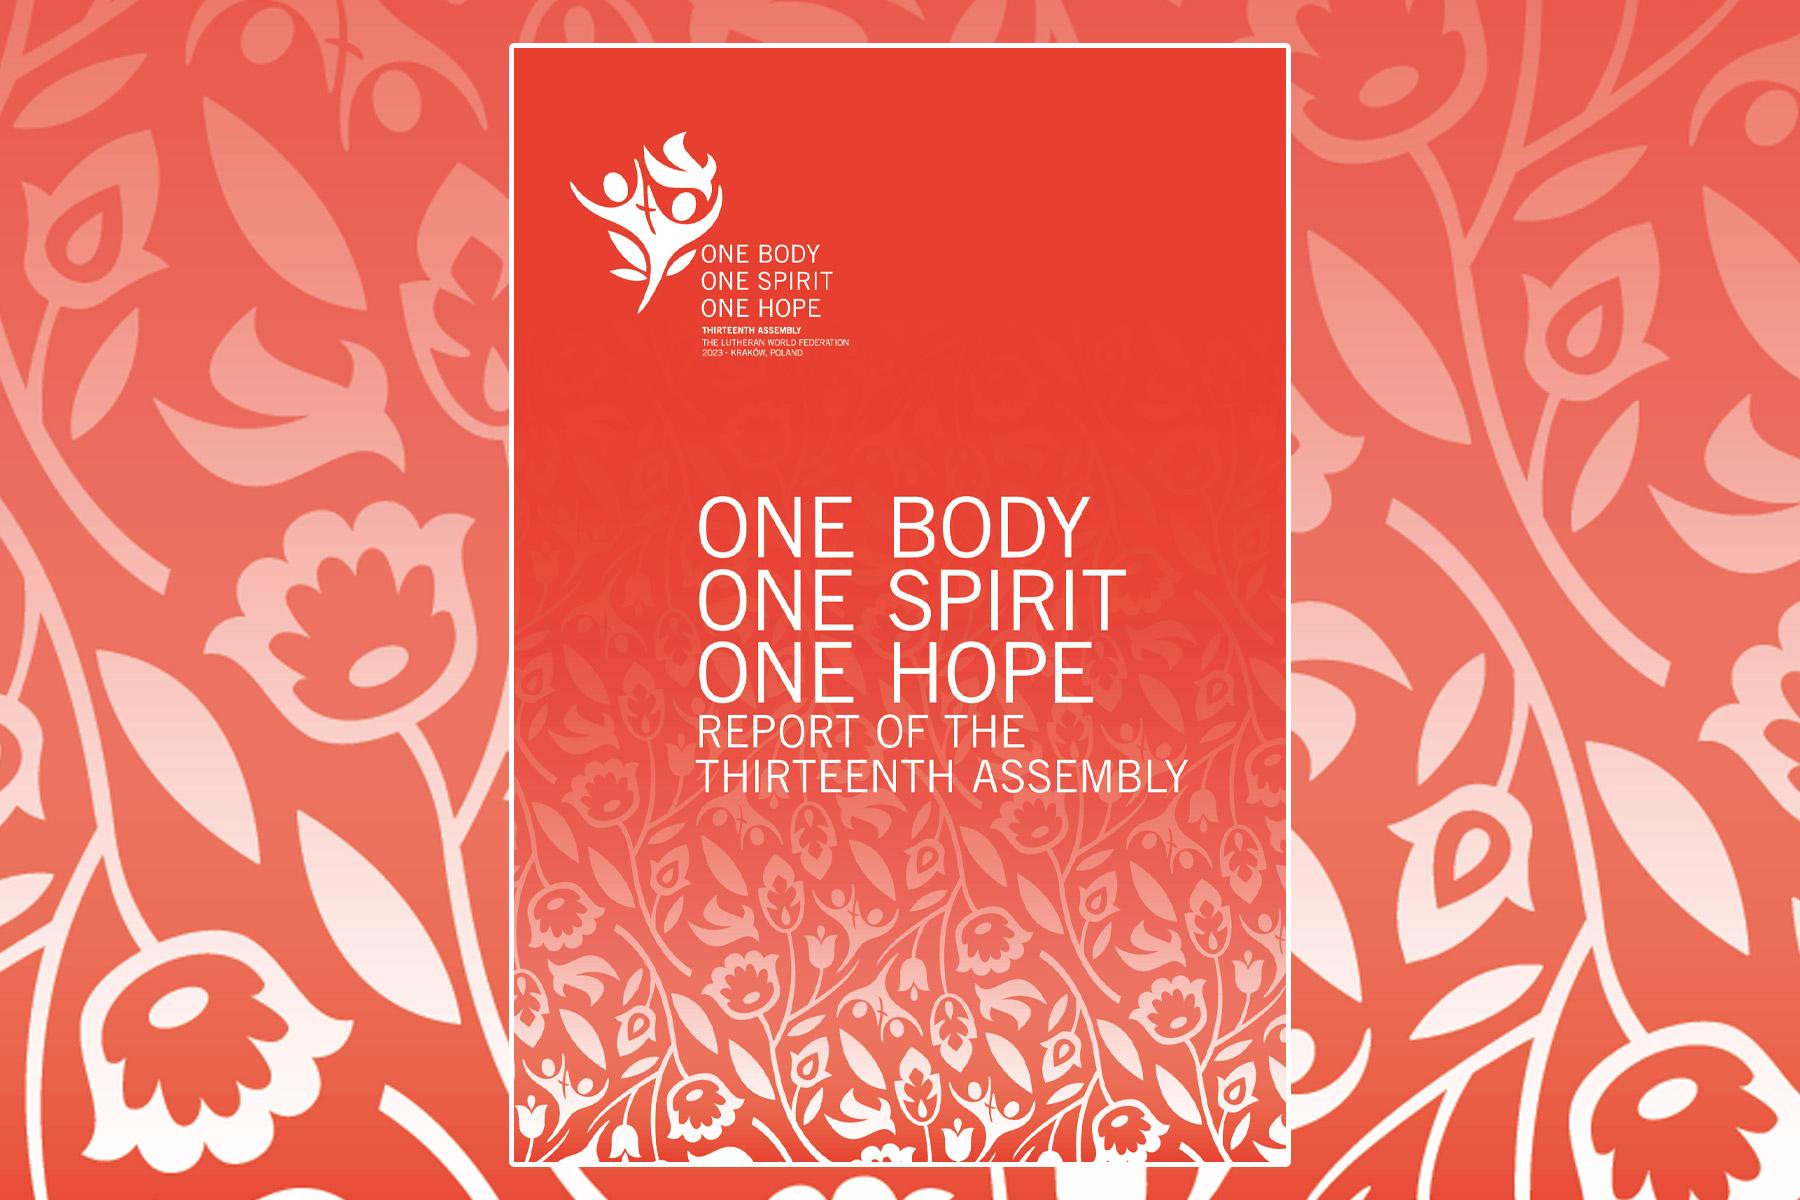     “One Body, One Spirit, One Hope” – Report of the Thirteenth LWF Assembly